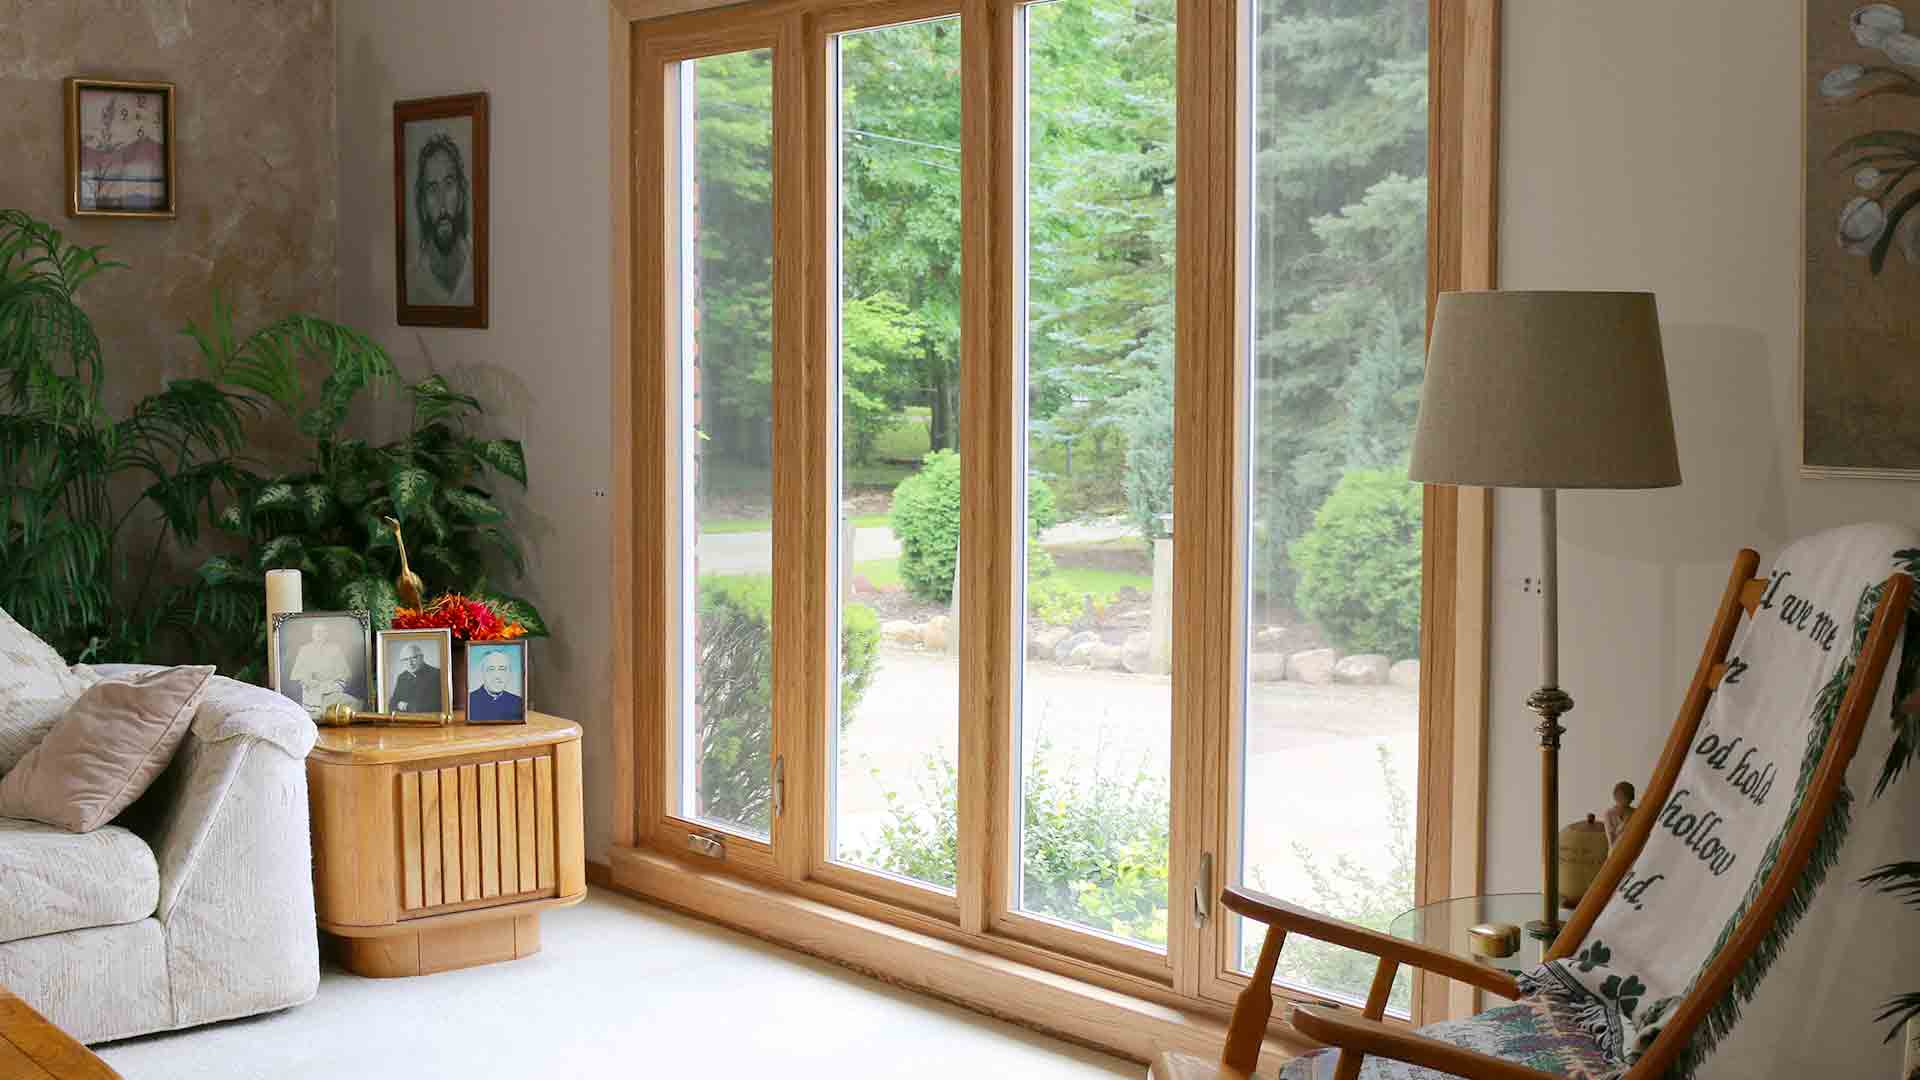 How Can You Find The Finest Glaziers For Your New Windows?